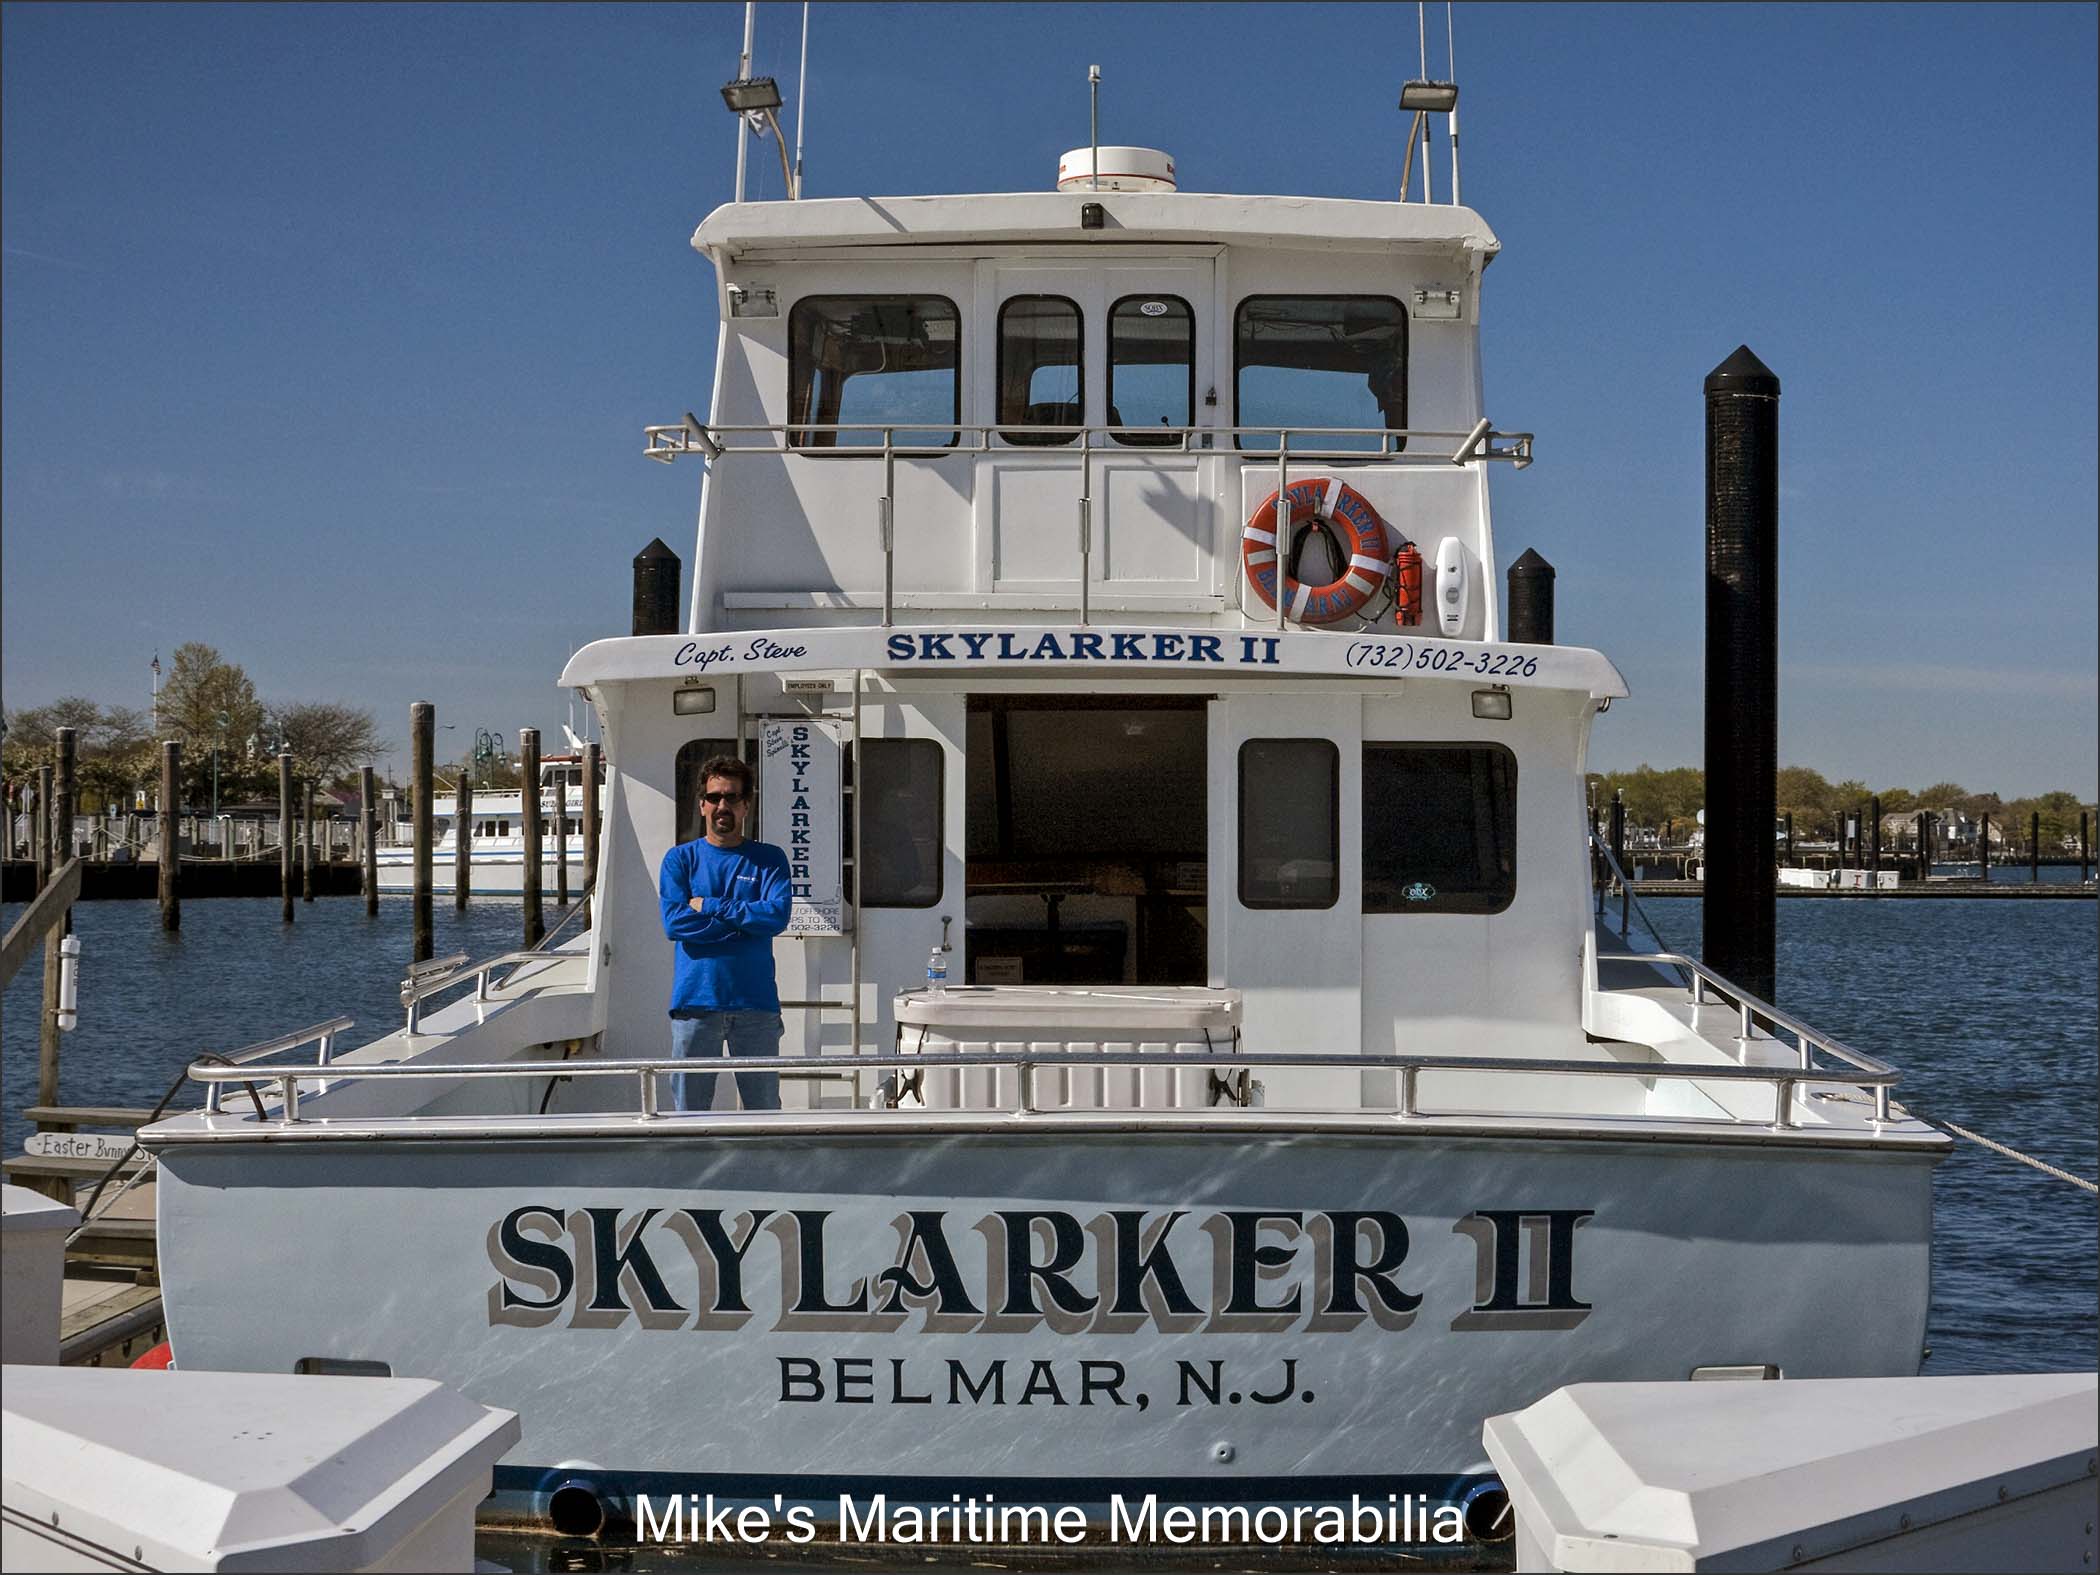 SKYLARKER II, Belmar, NJ – 2010 Captain Steve Spinelli at the stern of his "SKYLARKER II" from Belmar, NJ in April 2010. Captain Steve purchased the "SKYLARKER II" in 1996 from Captain Ken Namowitz and continued to operate her from Belmar, NJ. The "SKYLARKER II" was built in 1980 and is considered a Gillikin-built boat; the builder, Mervin Rose of Rose Craft, previously worked for the Gillikin family for many years. Captain Steve later took the boat back to Gillikin for repairs and removed the gin poles and about two feet of the cabin roof overhang. She later sailed as the "SEA NYMPH" and as the "BANTAM" before becoming the "SHOWTIME" from Block Island, RI.